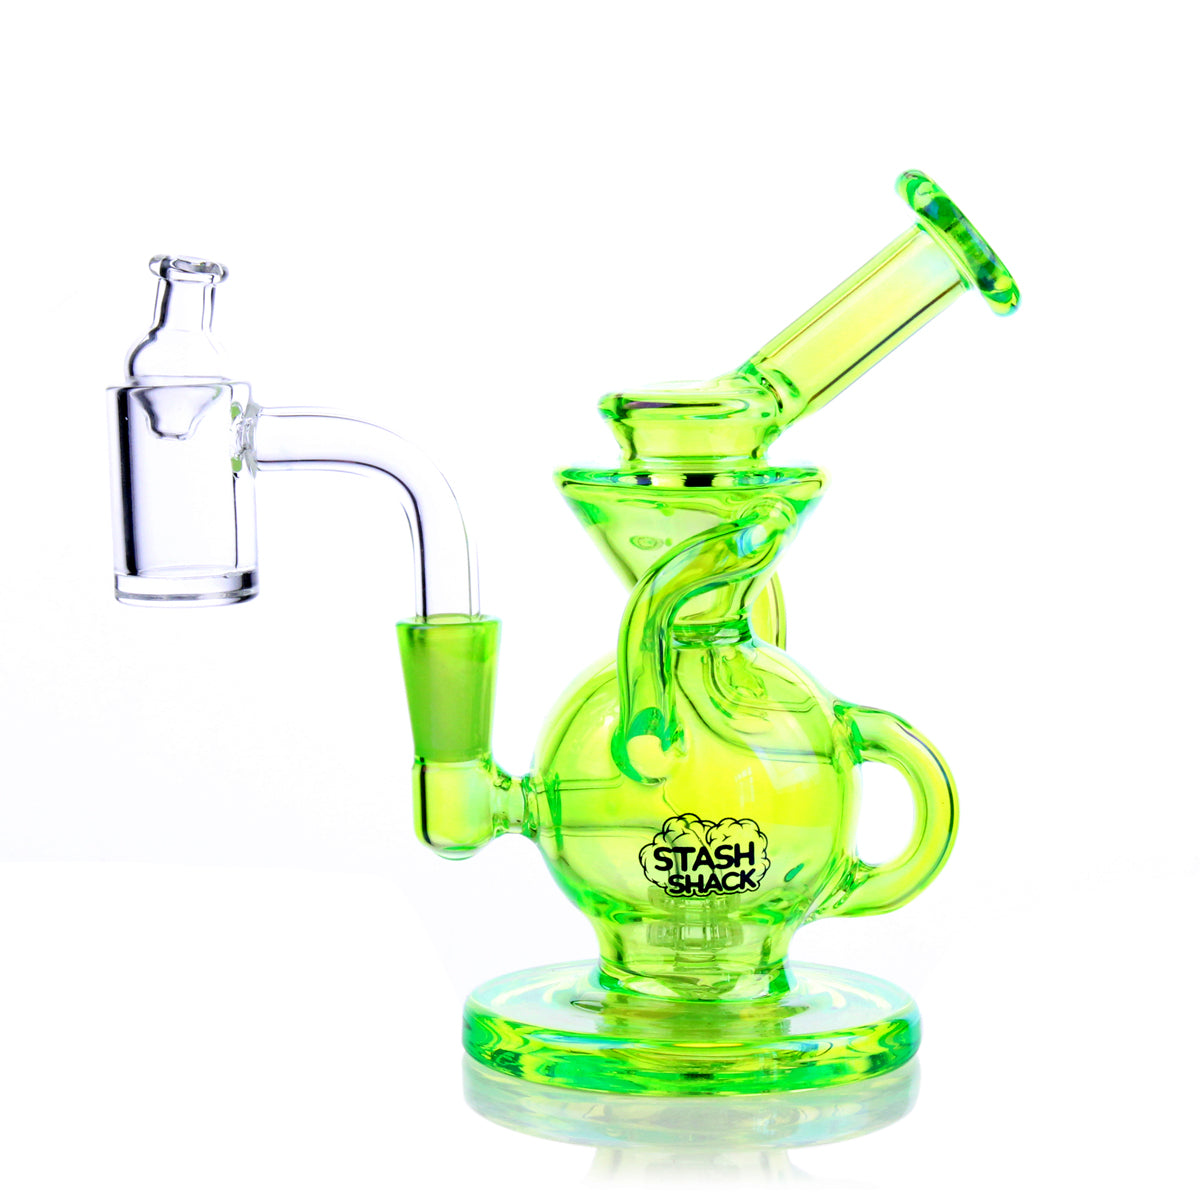 Electro Green Lirio Mini Rig by The Stash Shack with Showerhead Percolator, Front View